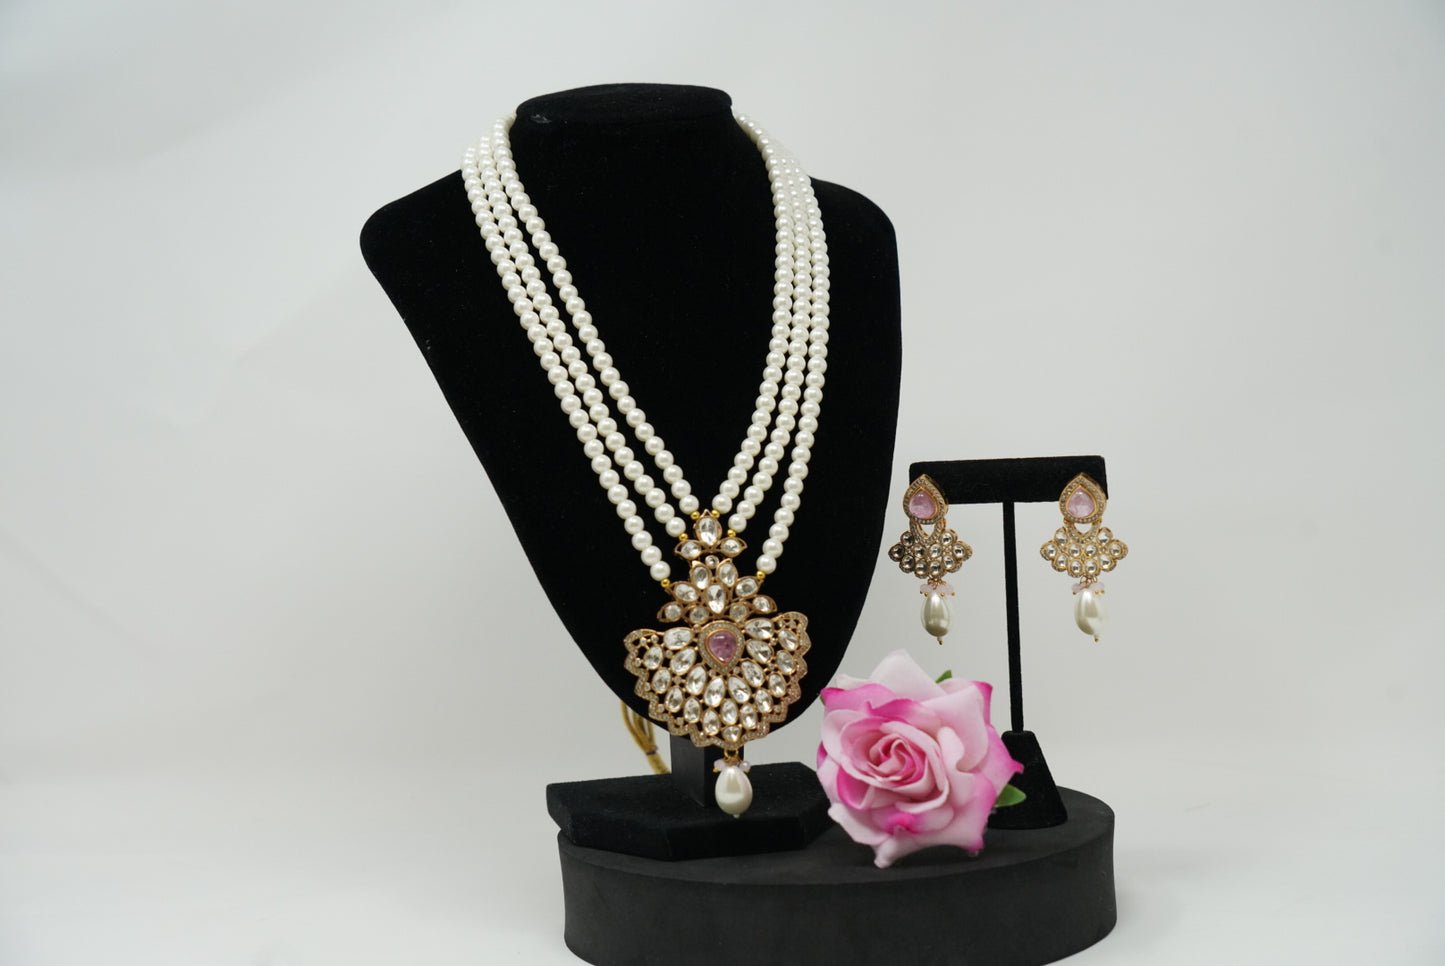 Pearl Victorian Long Necklace Set for Women